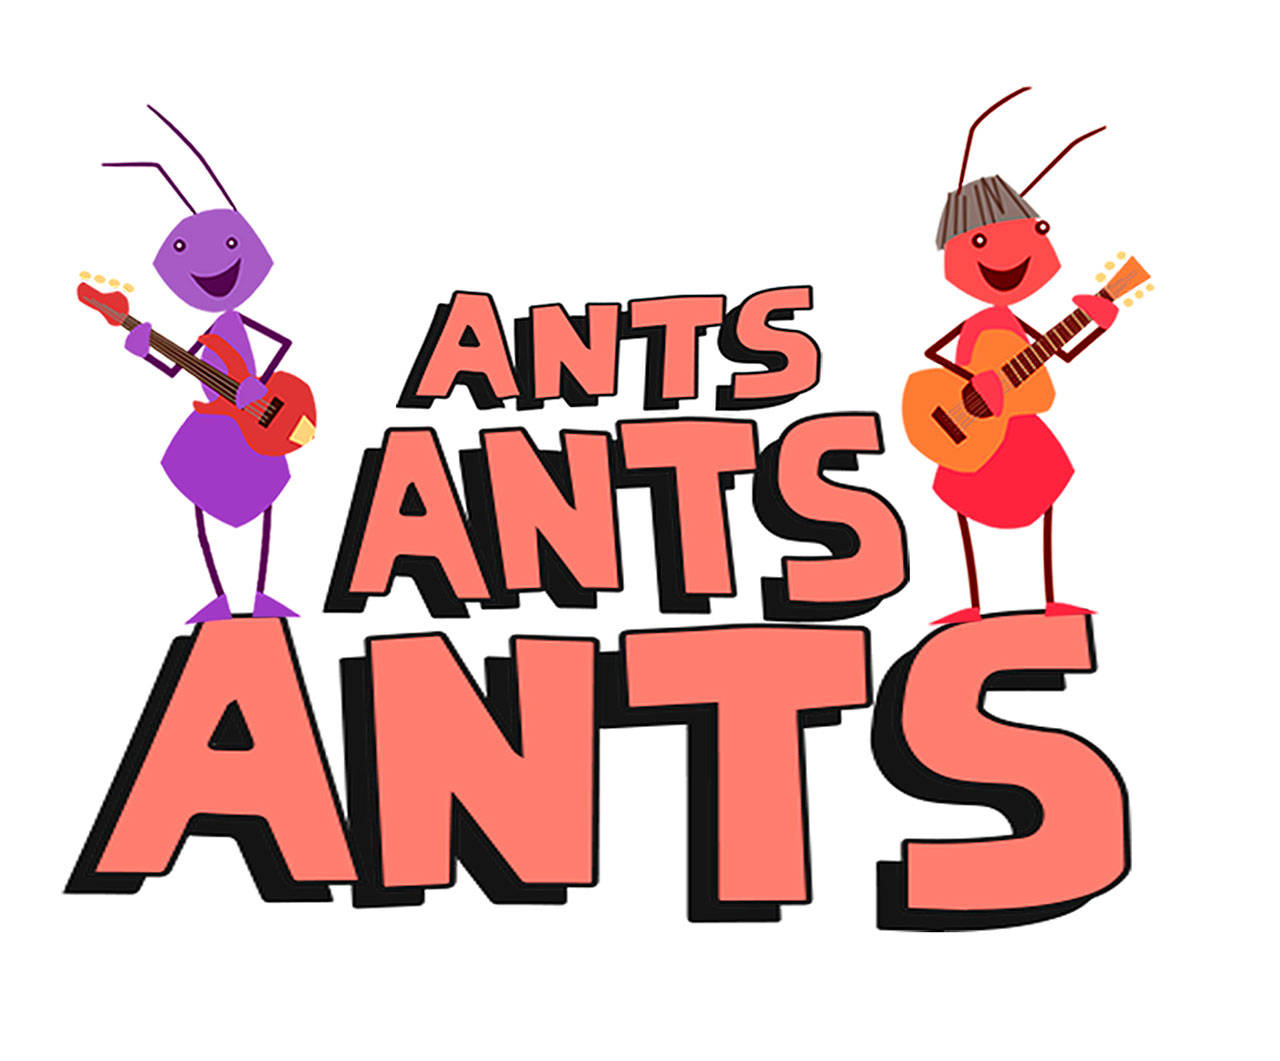 Ants Ants Ants at a library near you